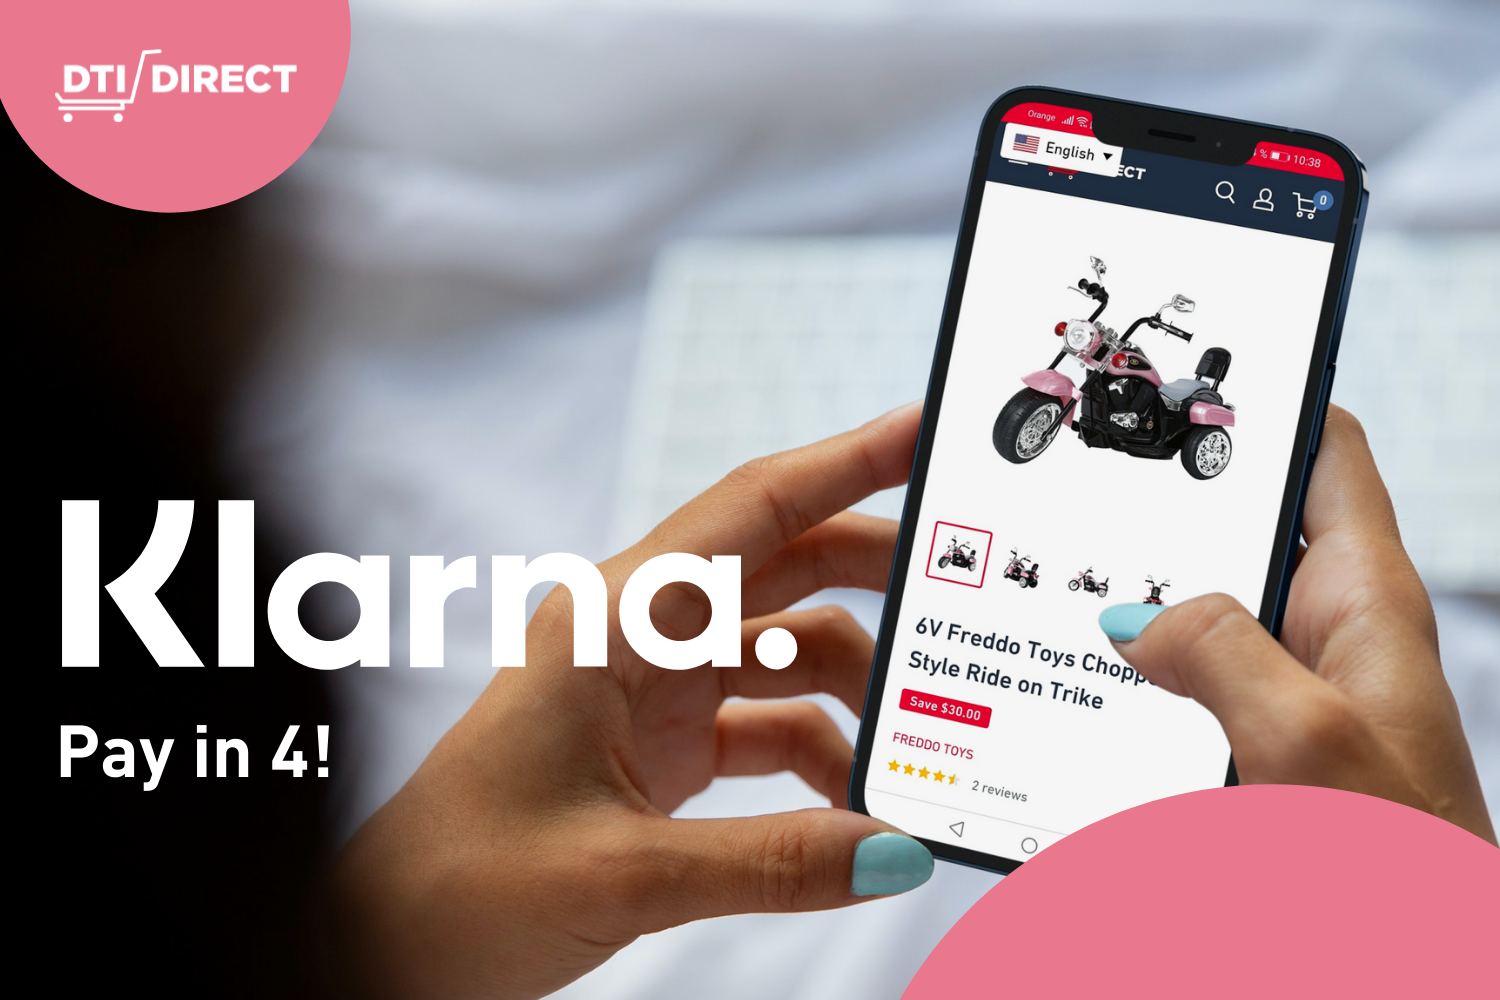 Now you can pay in 4 with Klarna